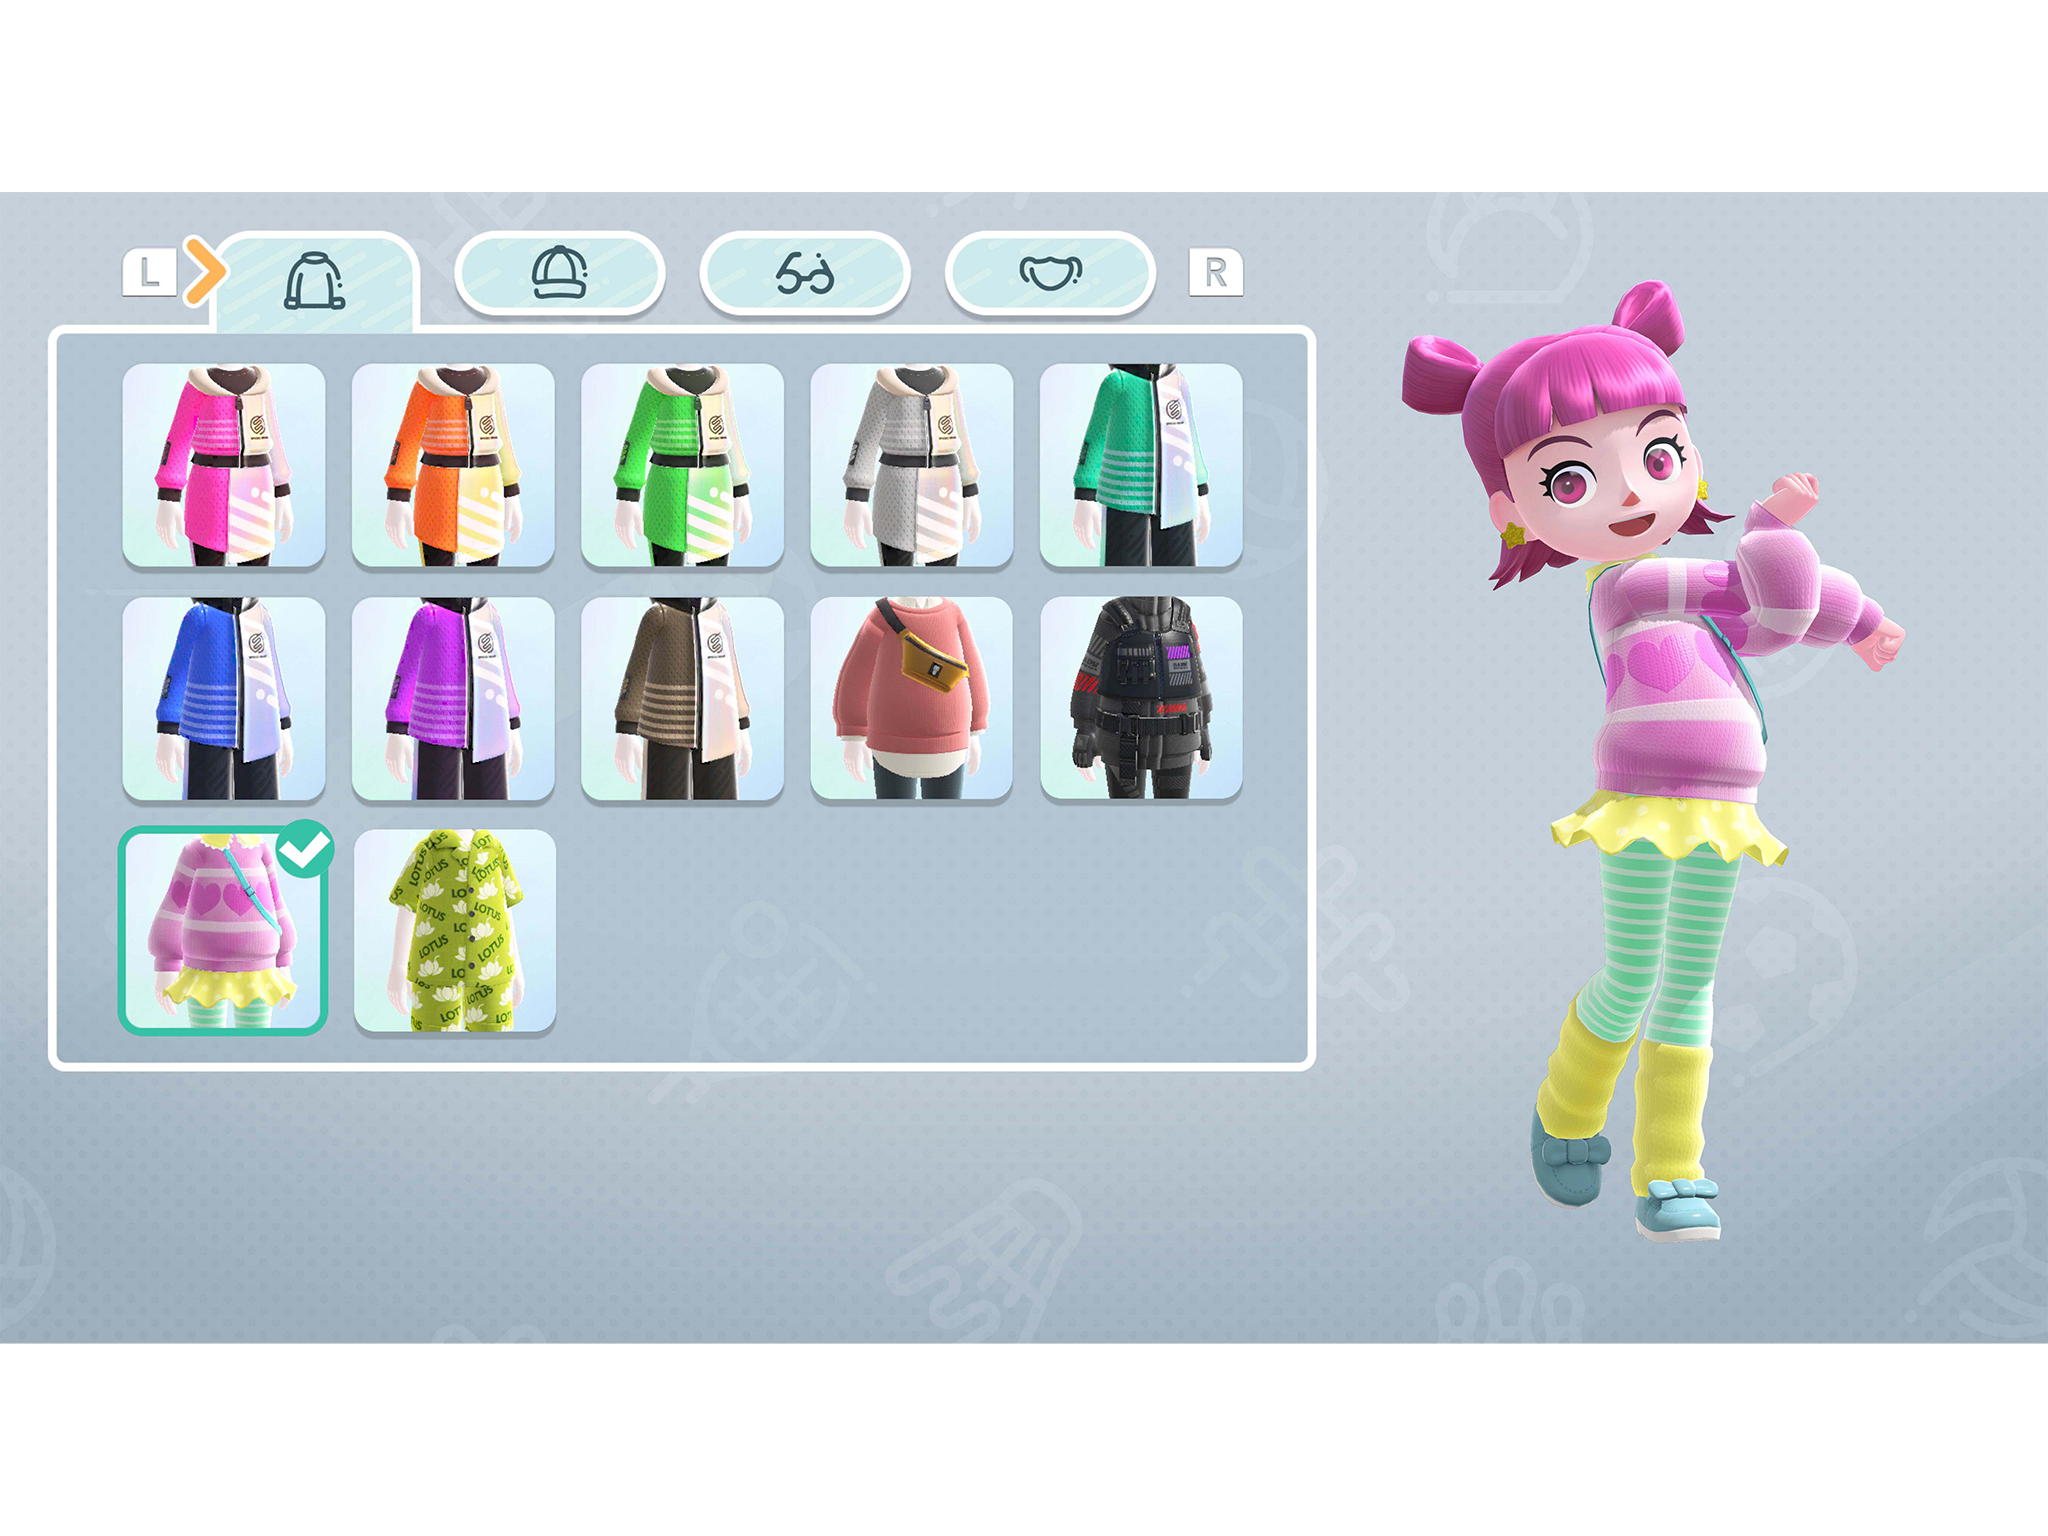 Players can customise their avatars with items unlocked online